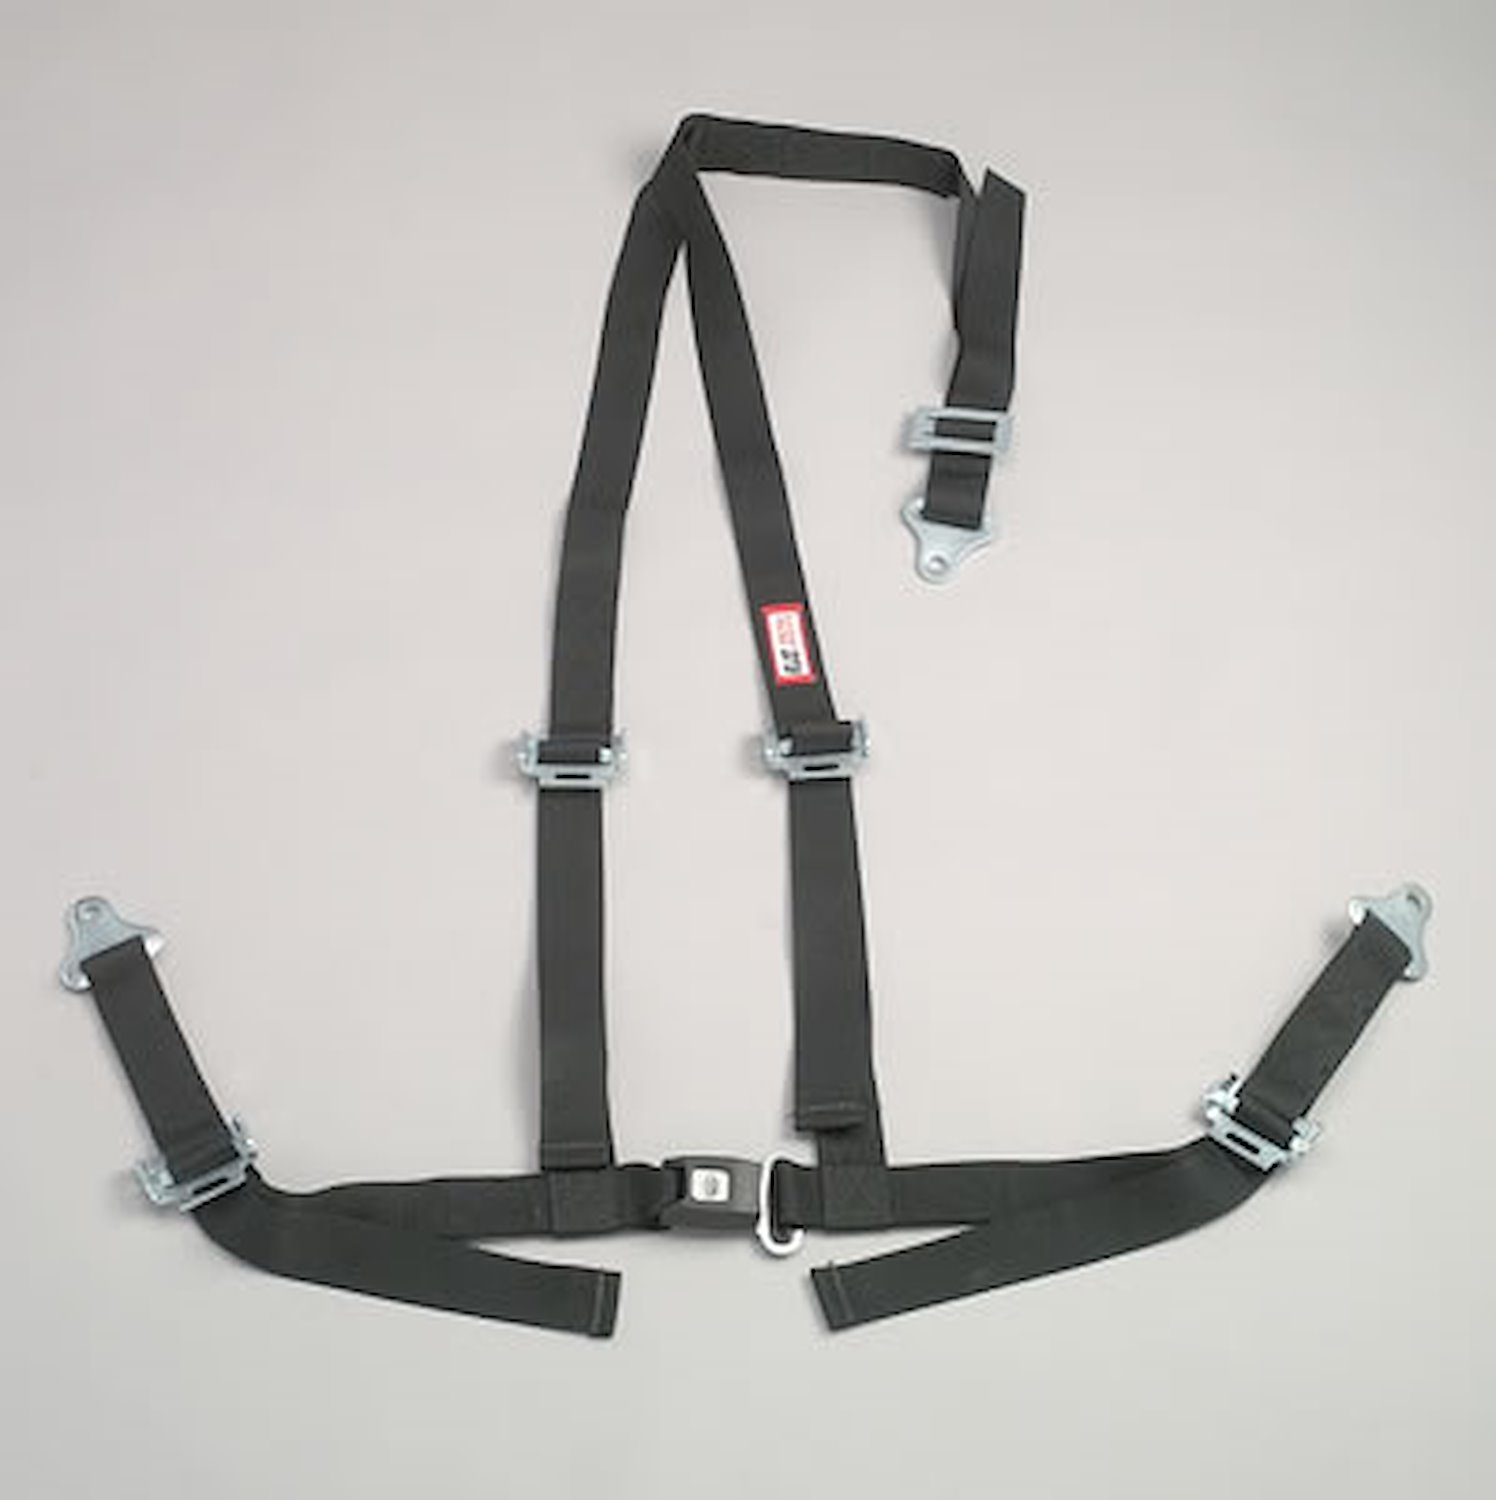 NON-SFI B&T HARNESS 2 PULL DOWN Lap Belt SNAP 2 S. H. Individual FLOOR Mount WRAP/SNAP w/STERNUM STRAP YELLOW